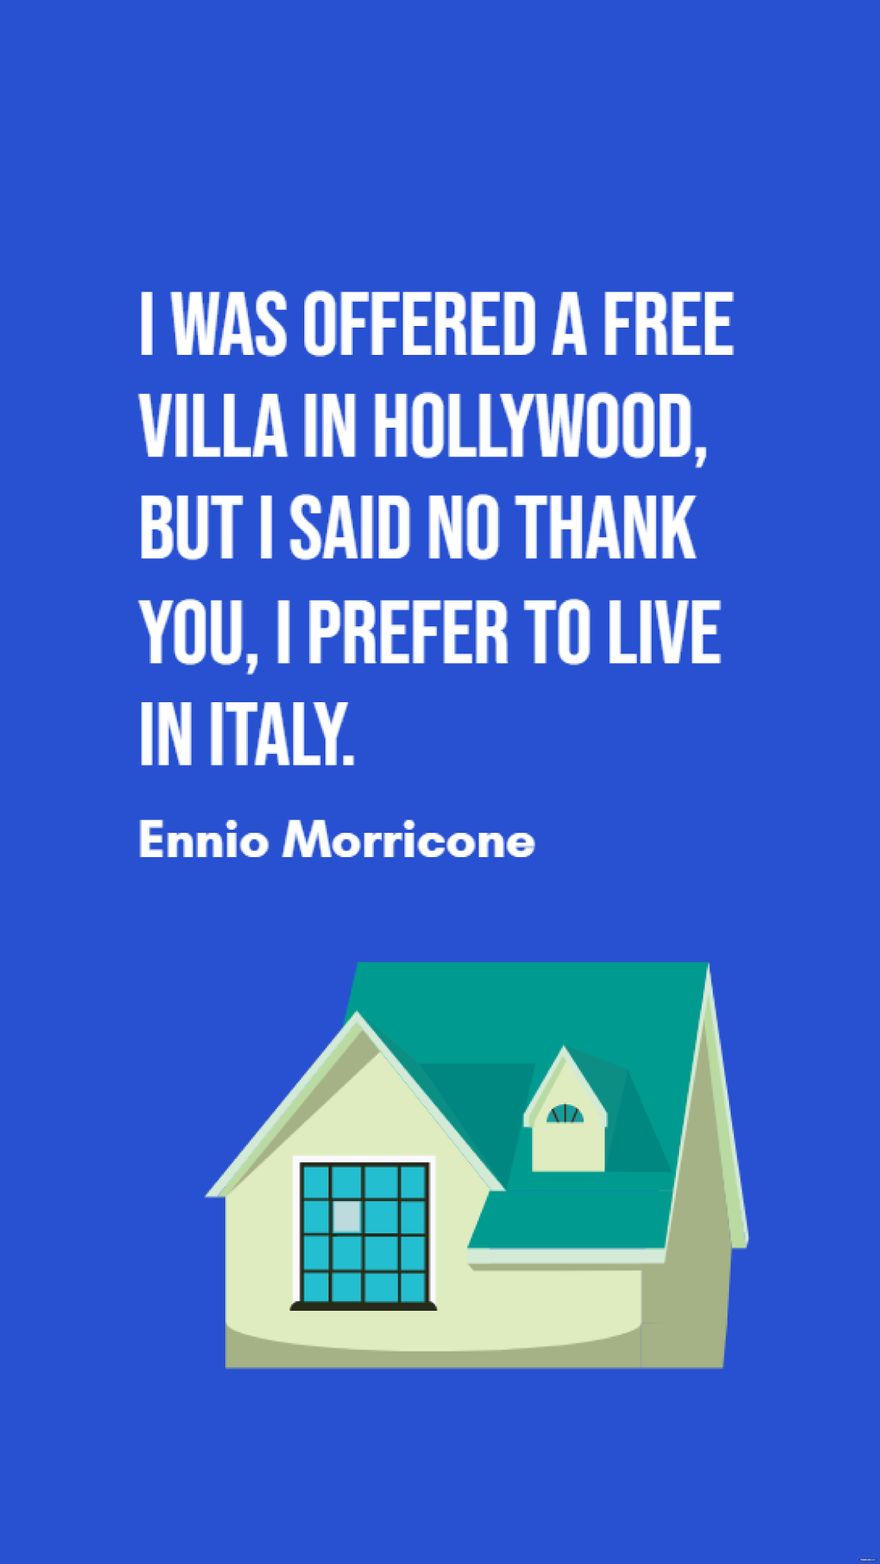 Ennio Morricone - I was offered a villa in Hollywood, but I said no thank you, I prefer to live in Italy.